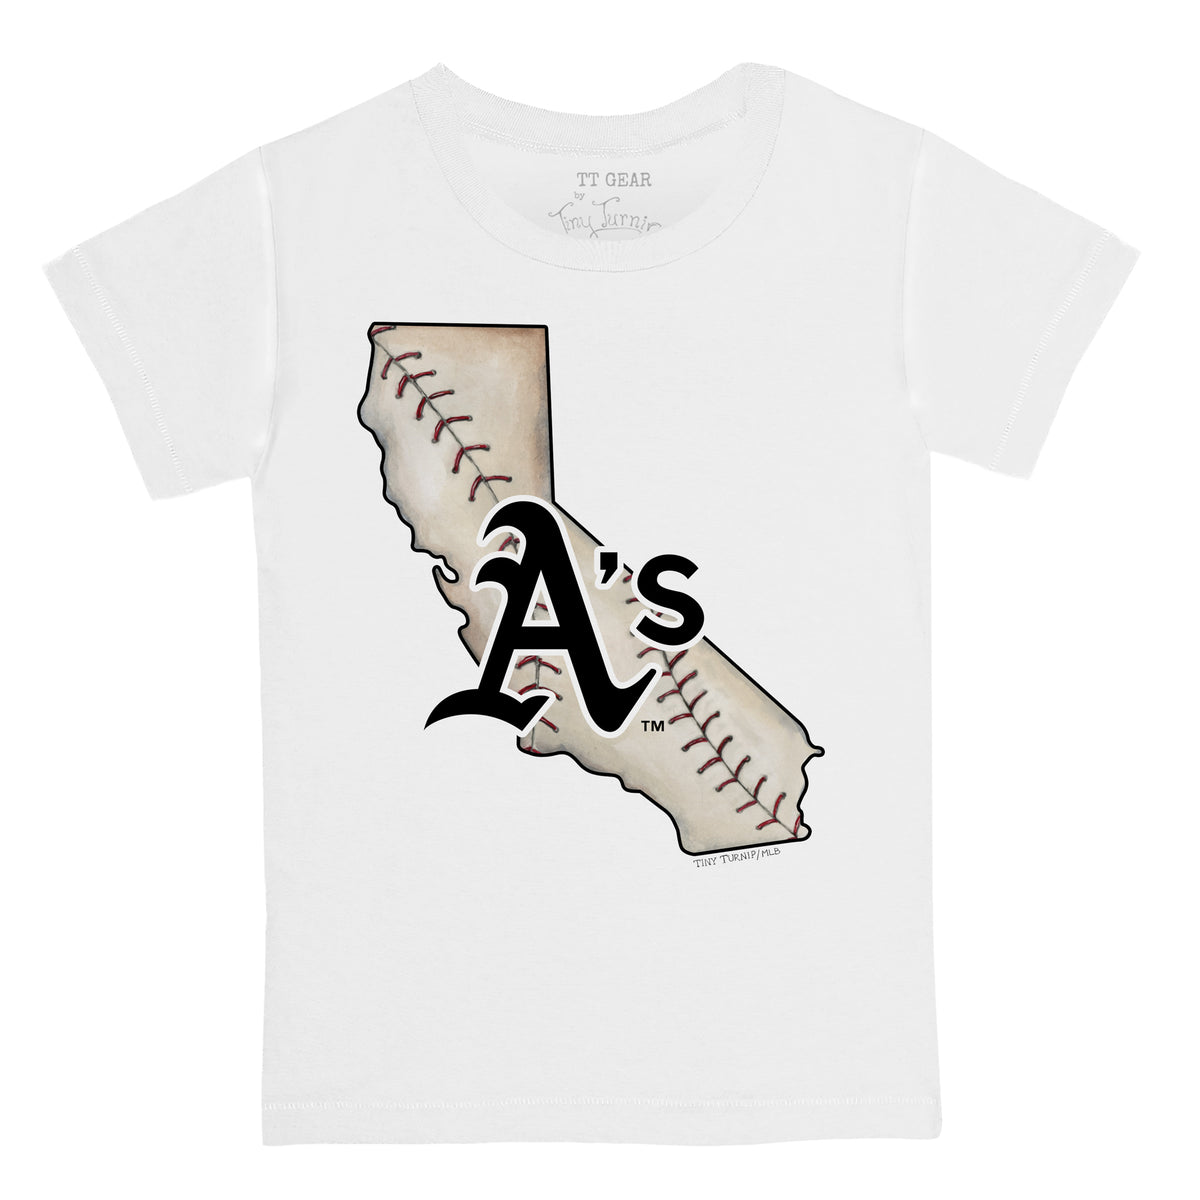 MLB Oakland Athletics t-shirt (Age 6) – Little Red Cactus